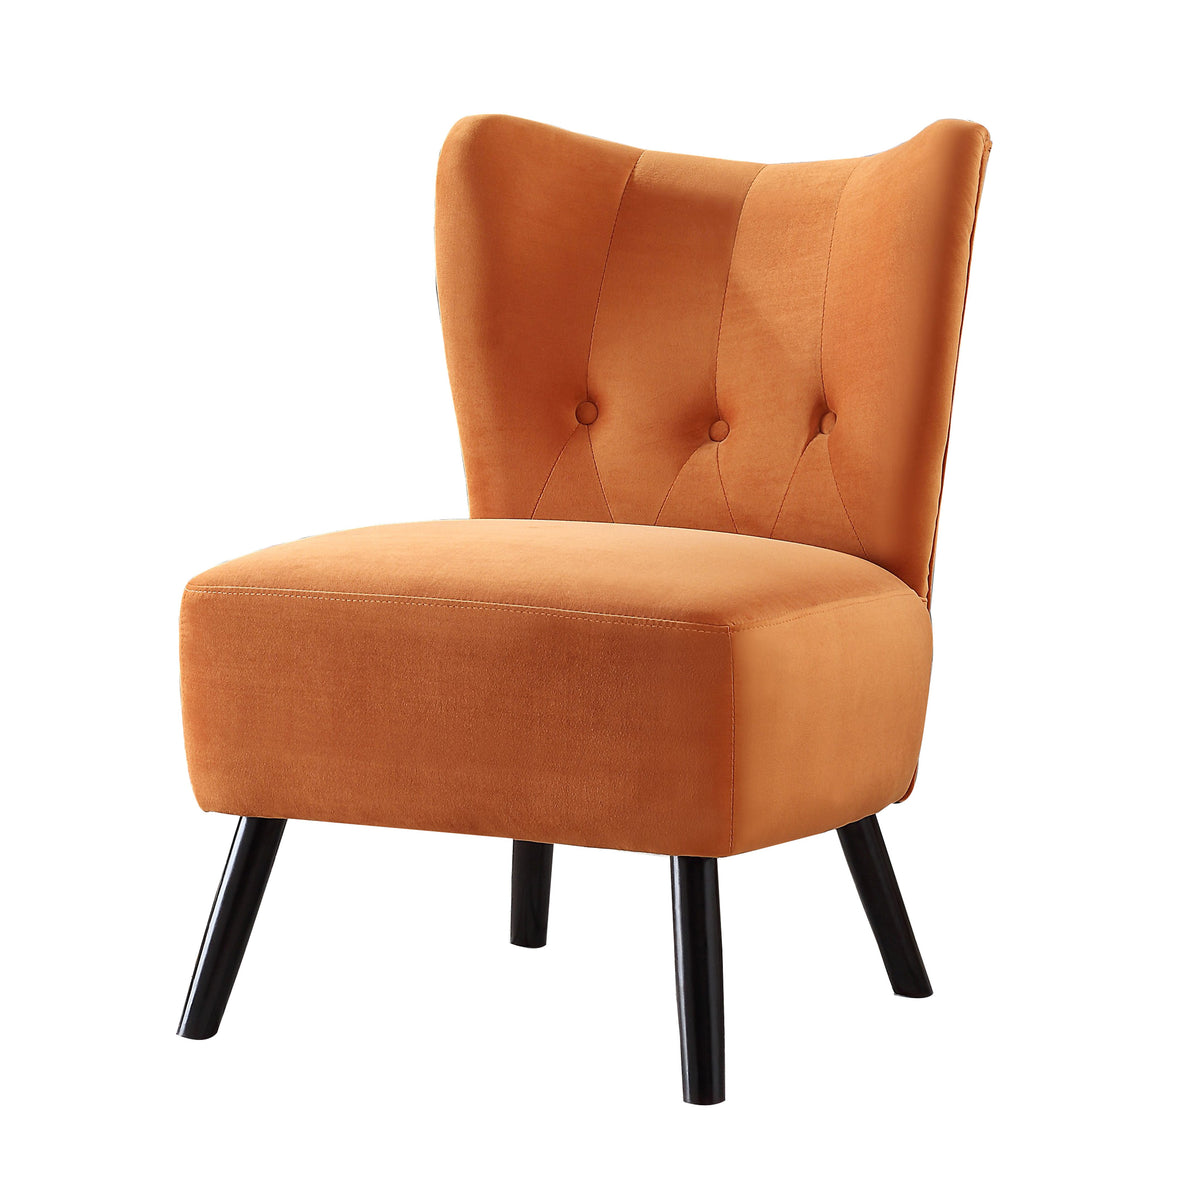 Upholstered Armless Accent Chair with Flared Back and Button Tufting, Orange - BM219780